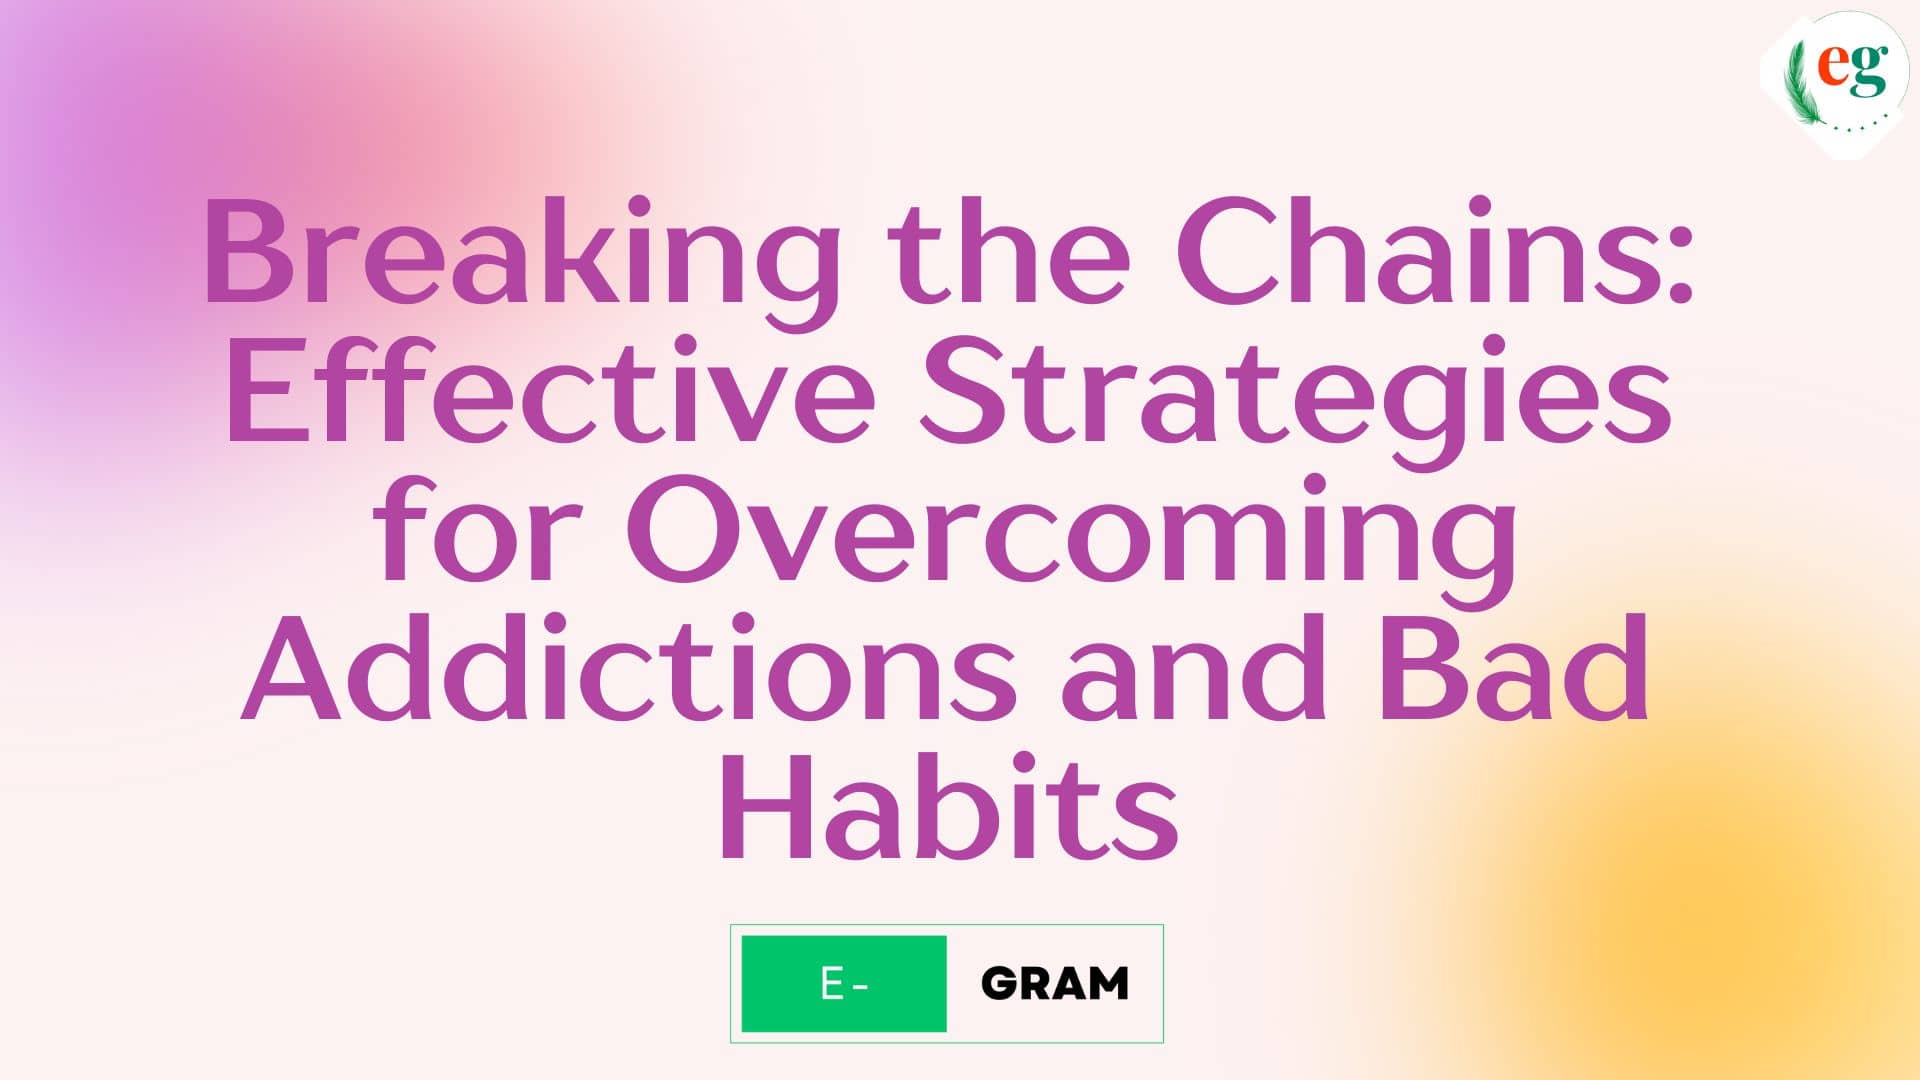 Breaking the Chains: Effective Strategies for Overcoming Addictions and Bad Habits